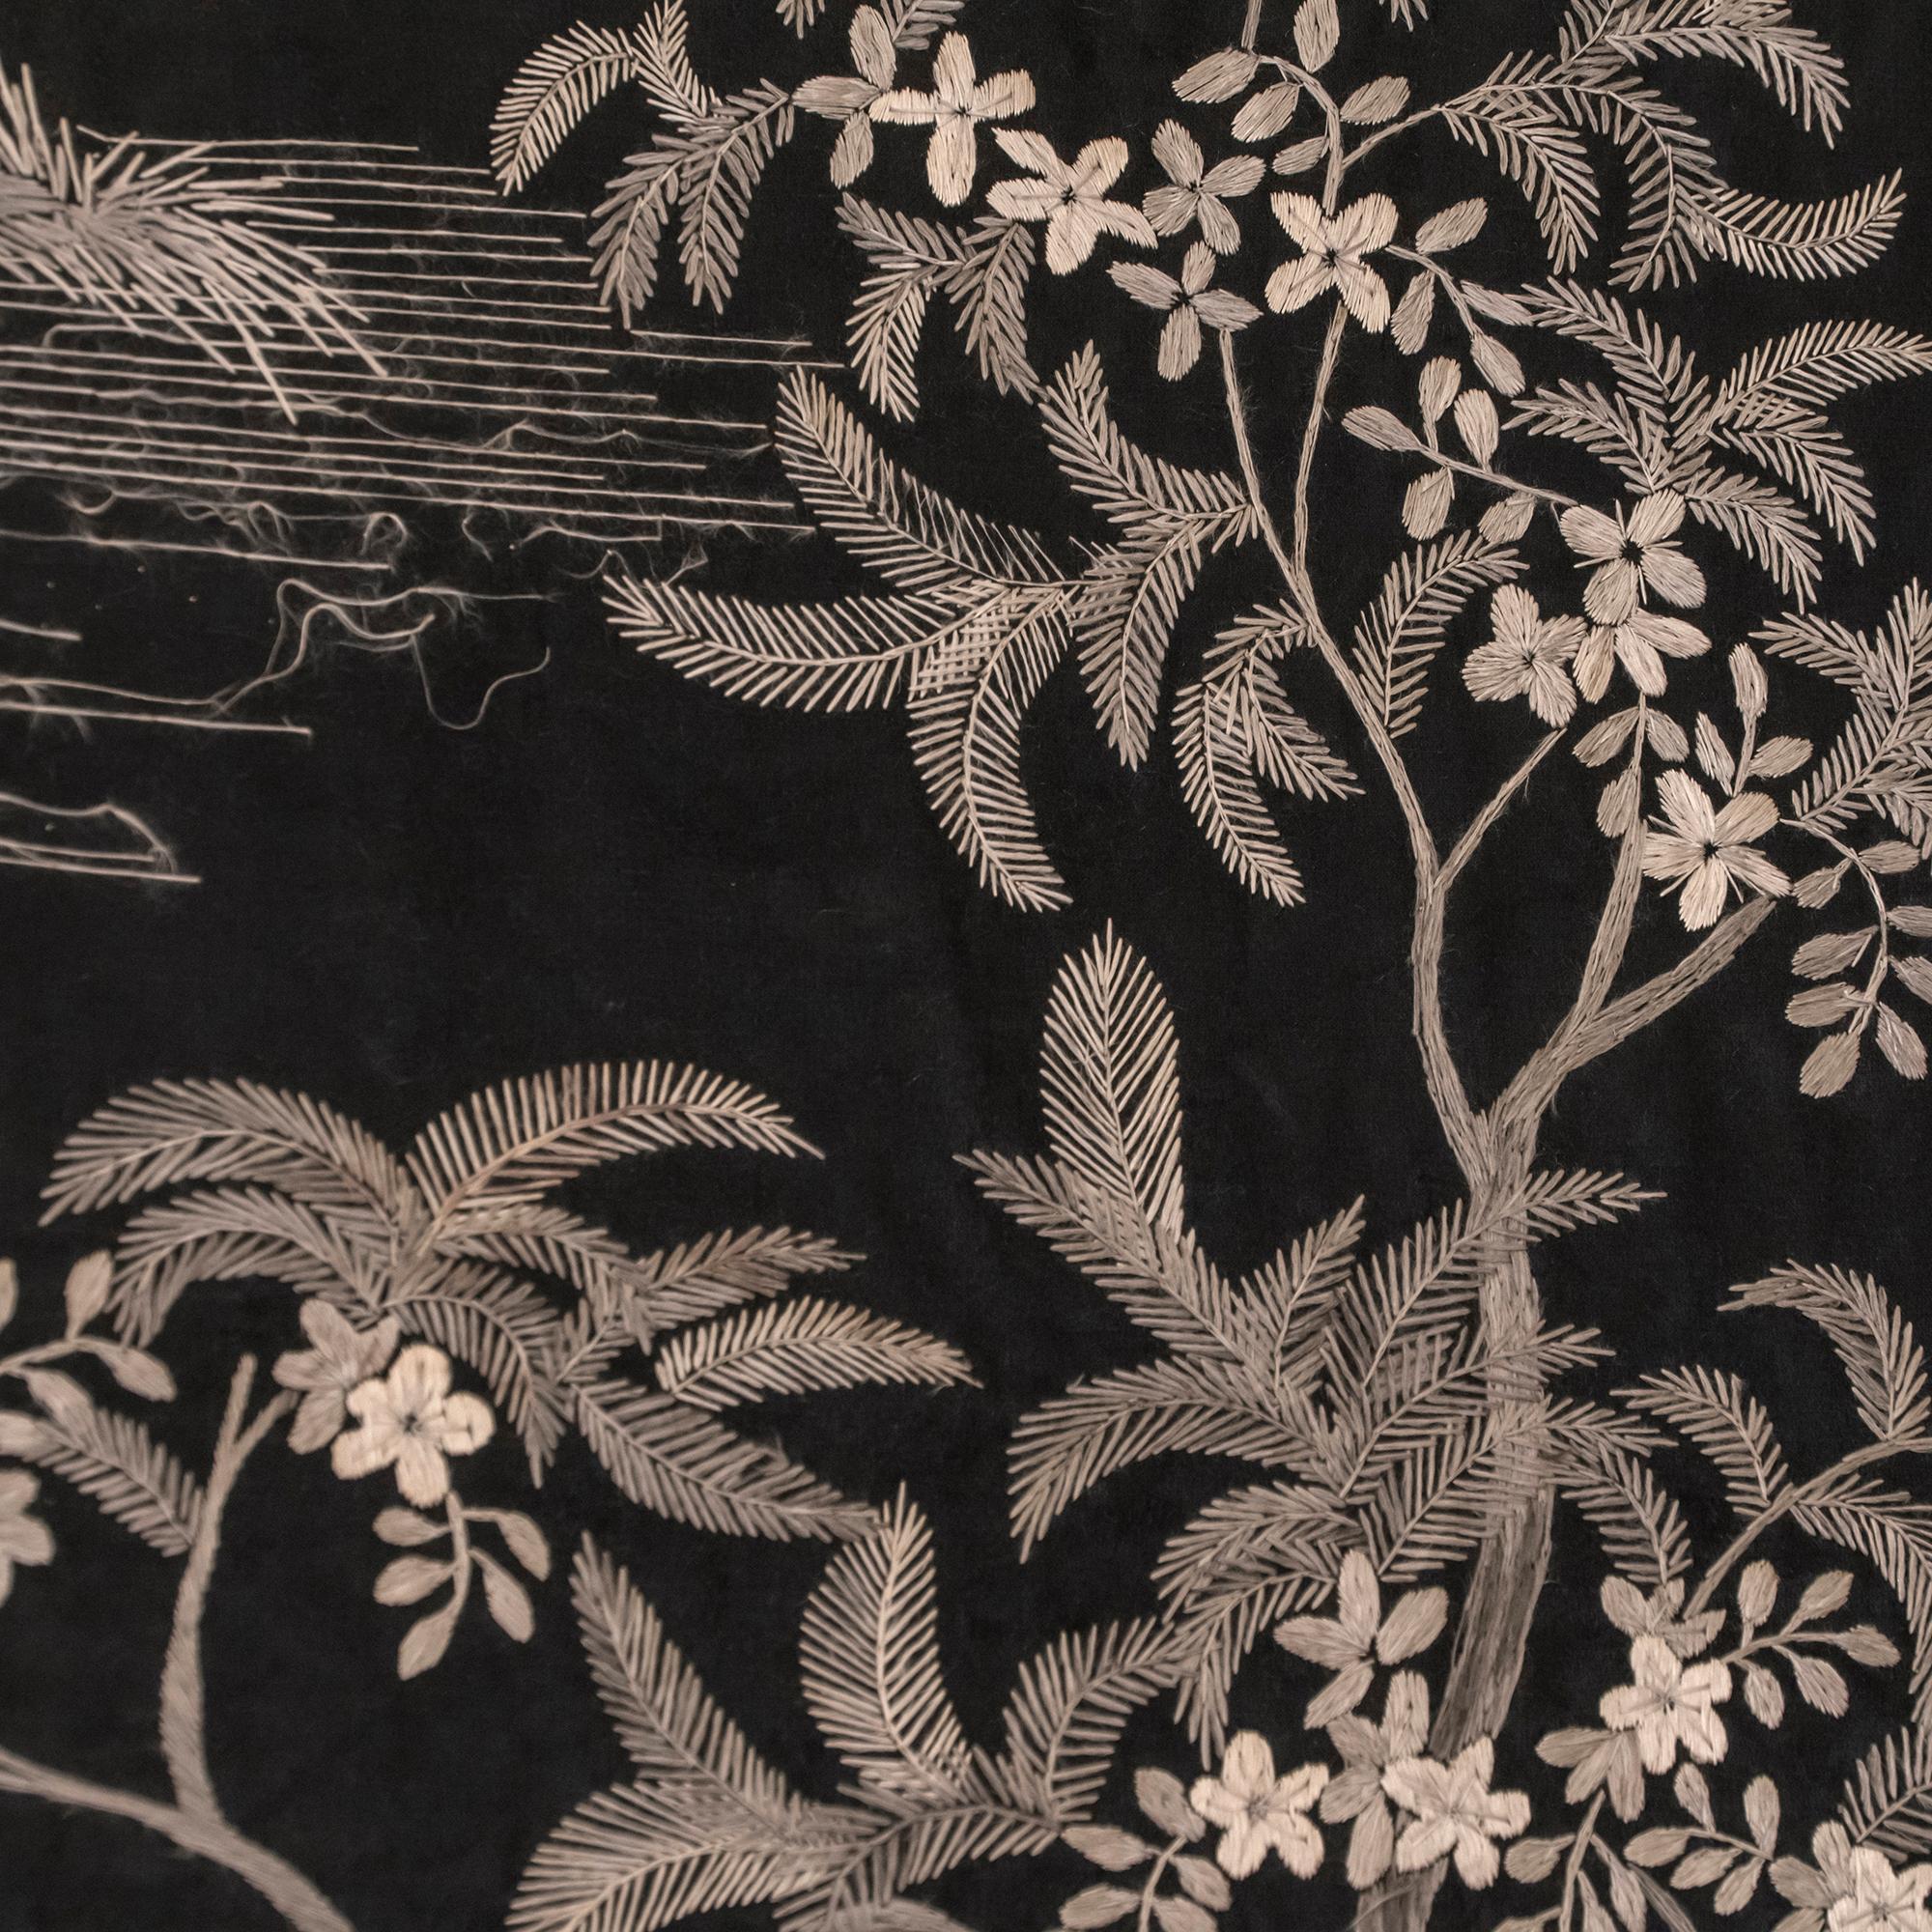 1950s Indochinese decorative wall panel, embroidered black and gold silk, framed in black wood, slight tear in the left side as in the image.
  